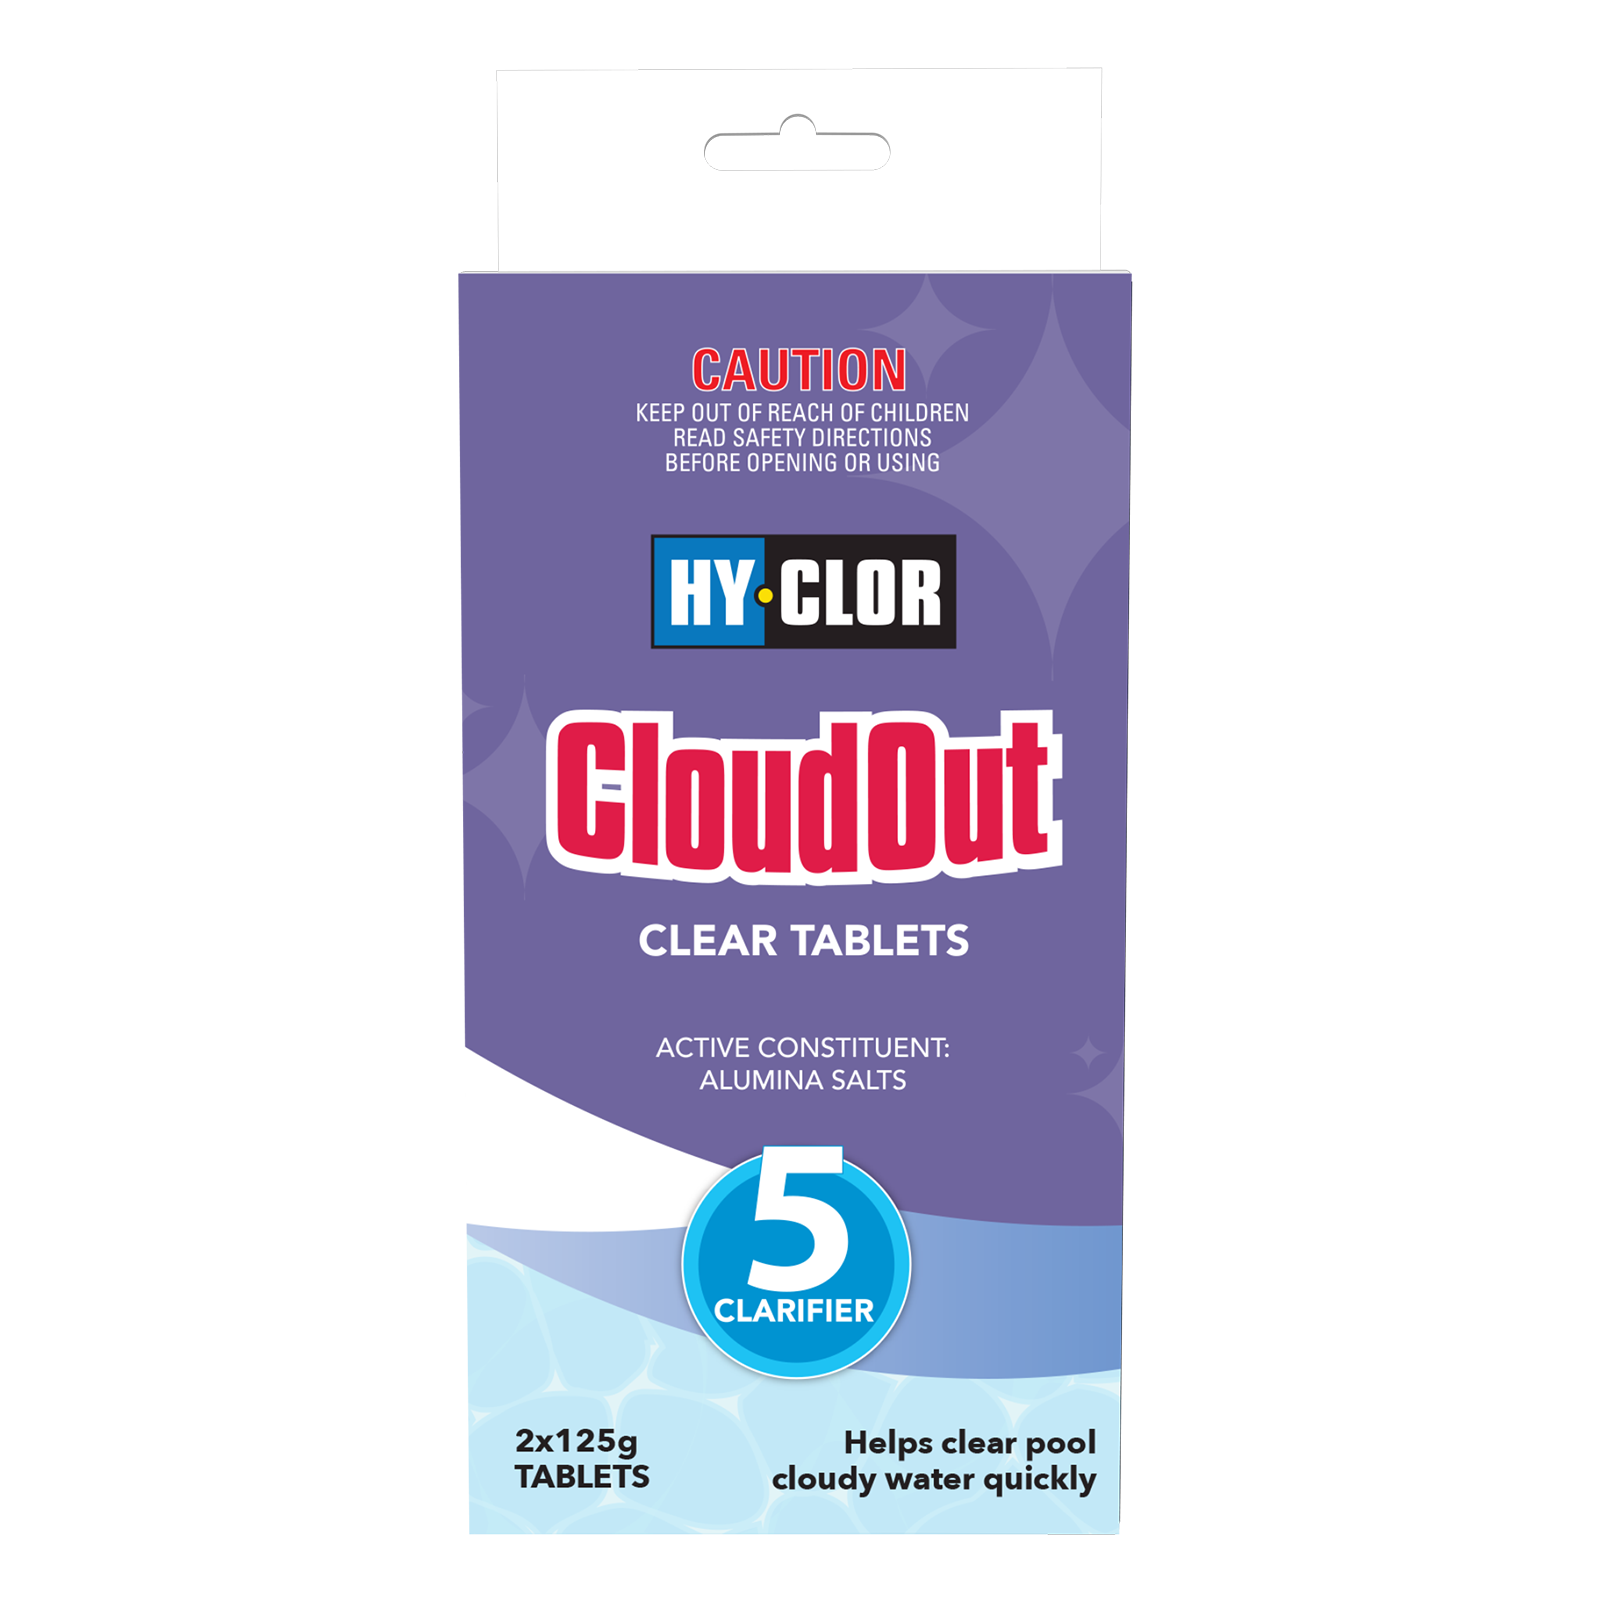 HY-CLOR CLOUD OUT CLEAR TABLETS